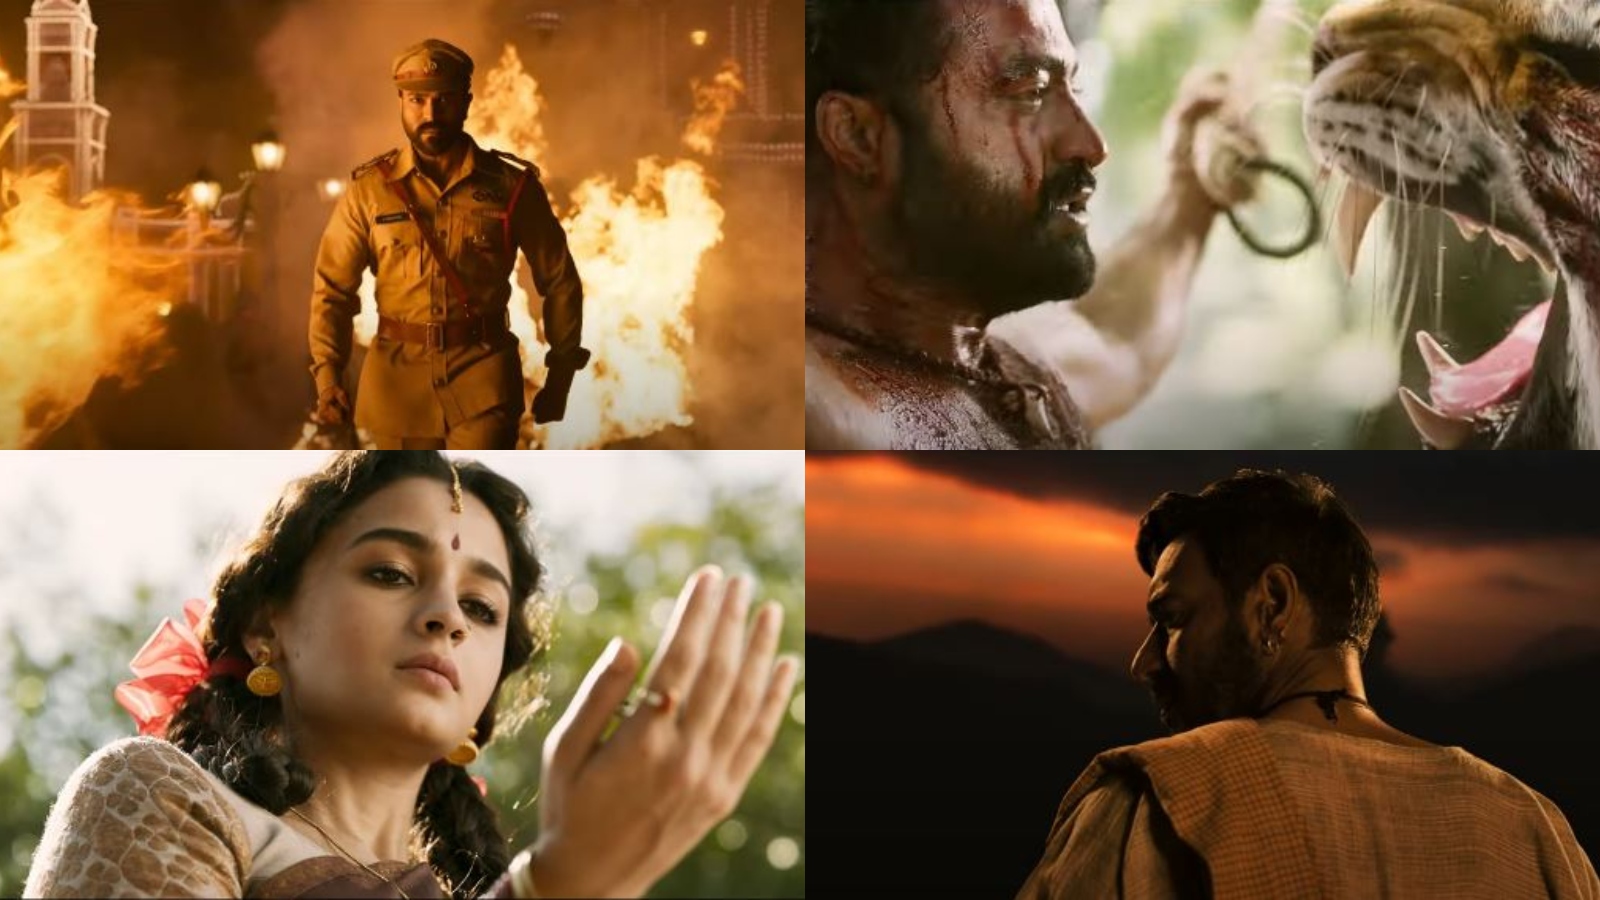 RRR trailer: Ram Charan and Jr. NTR bring another SS Rajamouli spectacle to life with slick action scenes and larger than life appeal